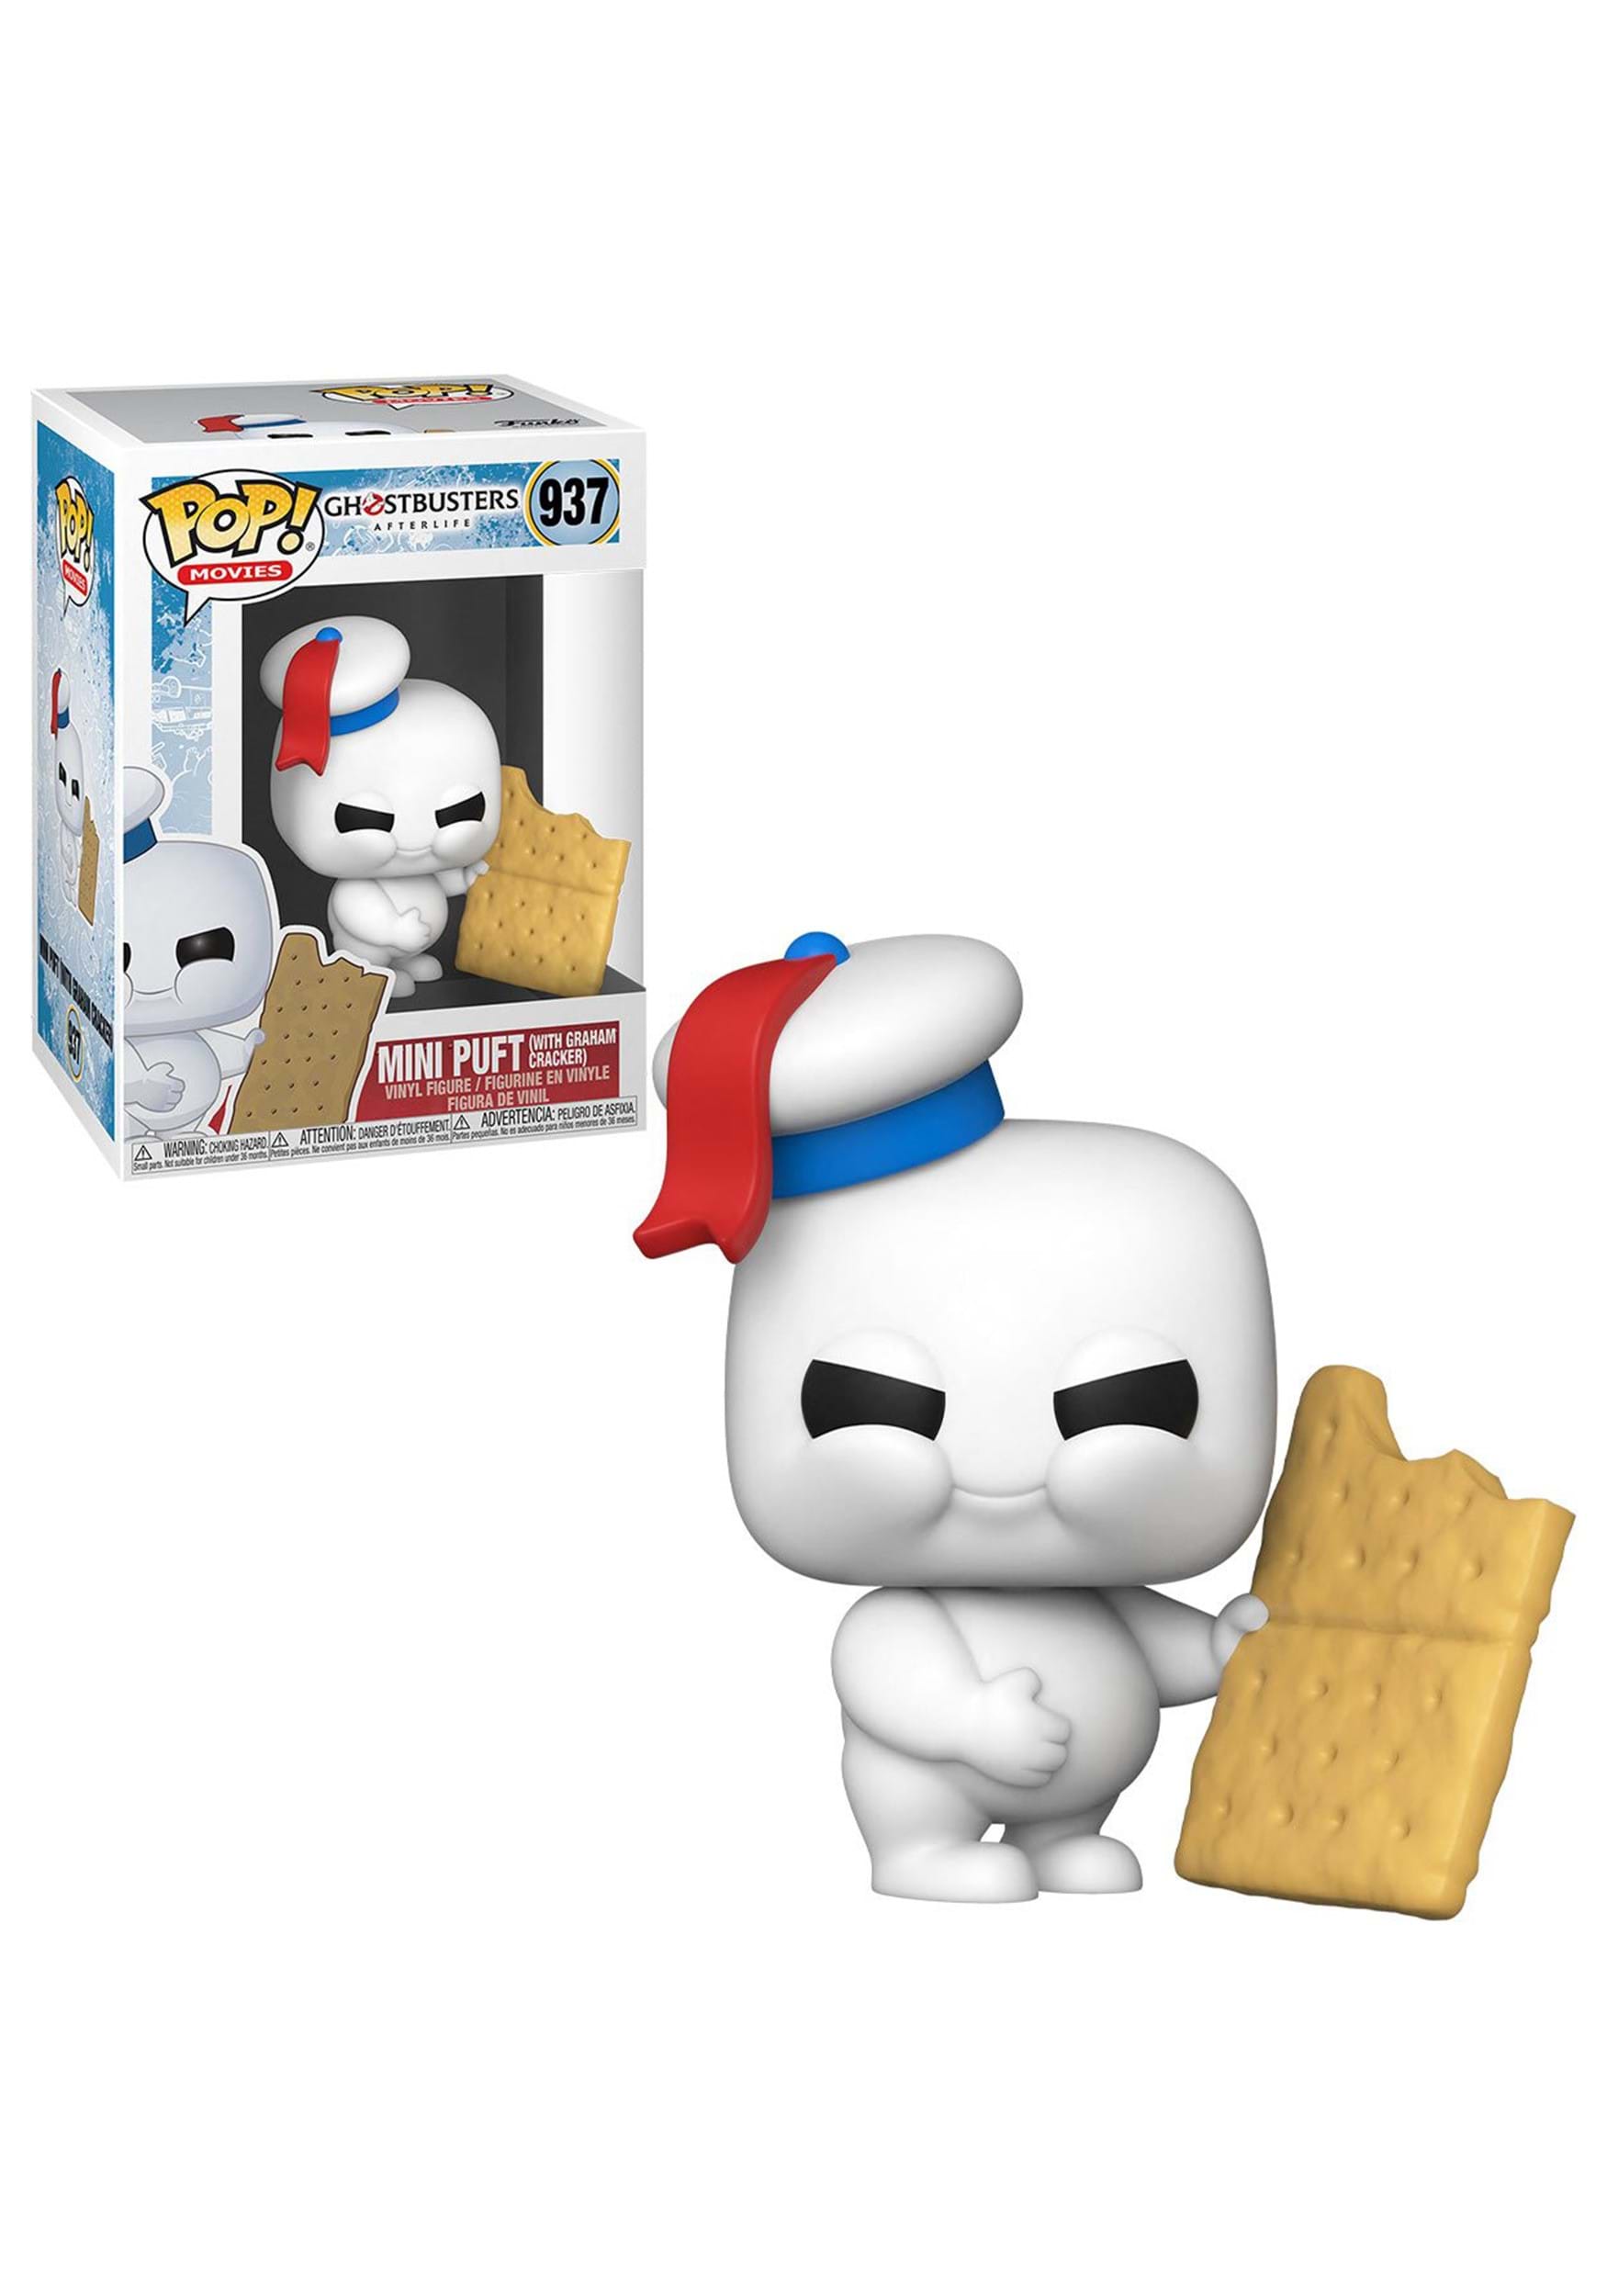 Funko POP! Movies: Ghostbusters: Afterlife- Mini Puft with Graham Cracker Figure